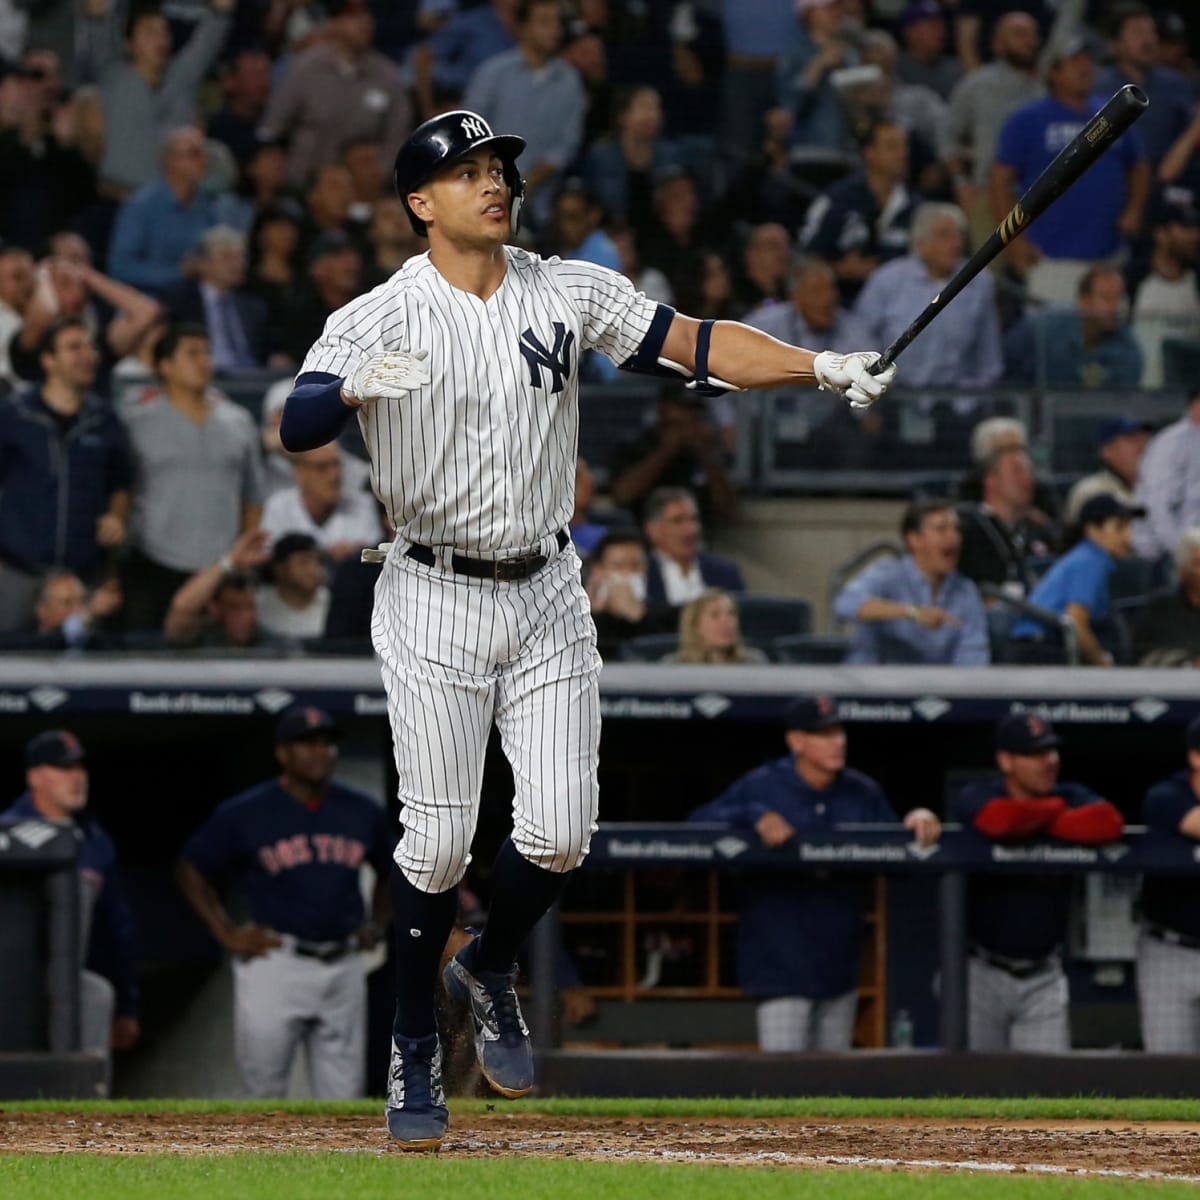 Yankees' Giancarlo Stanton belts another bullet line driv